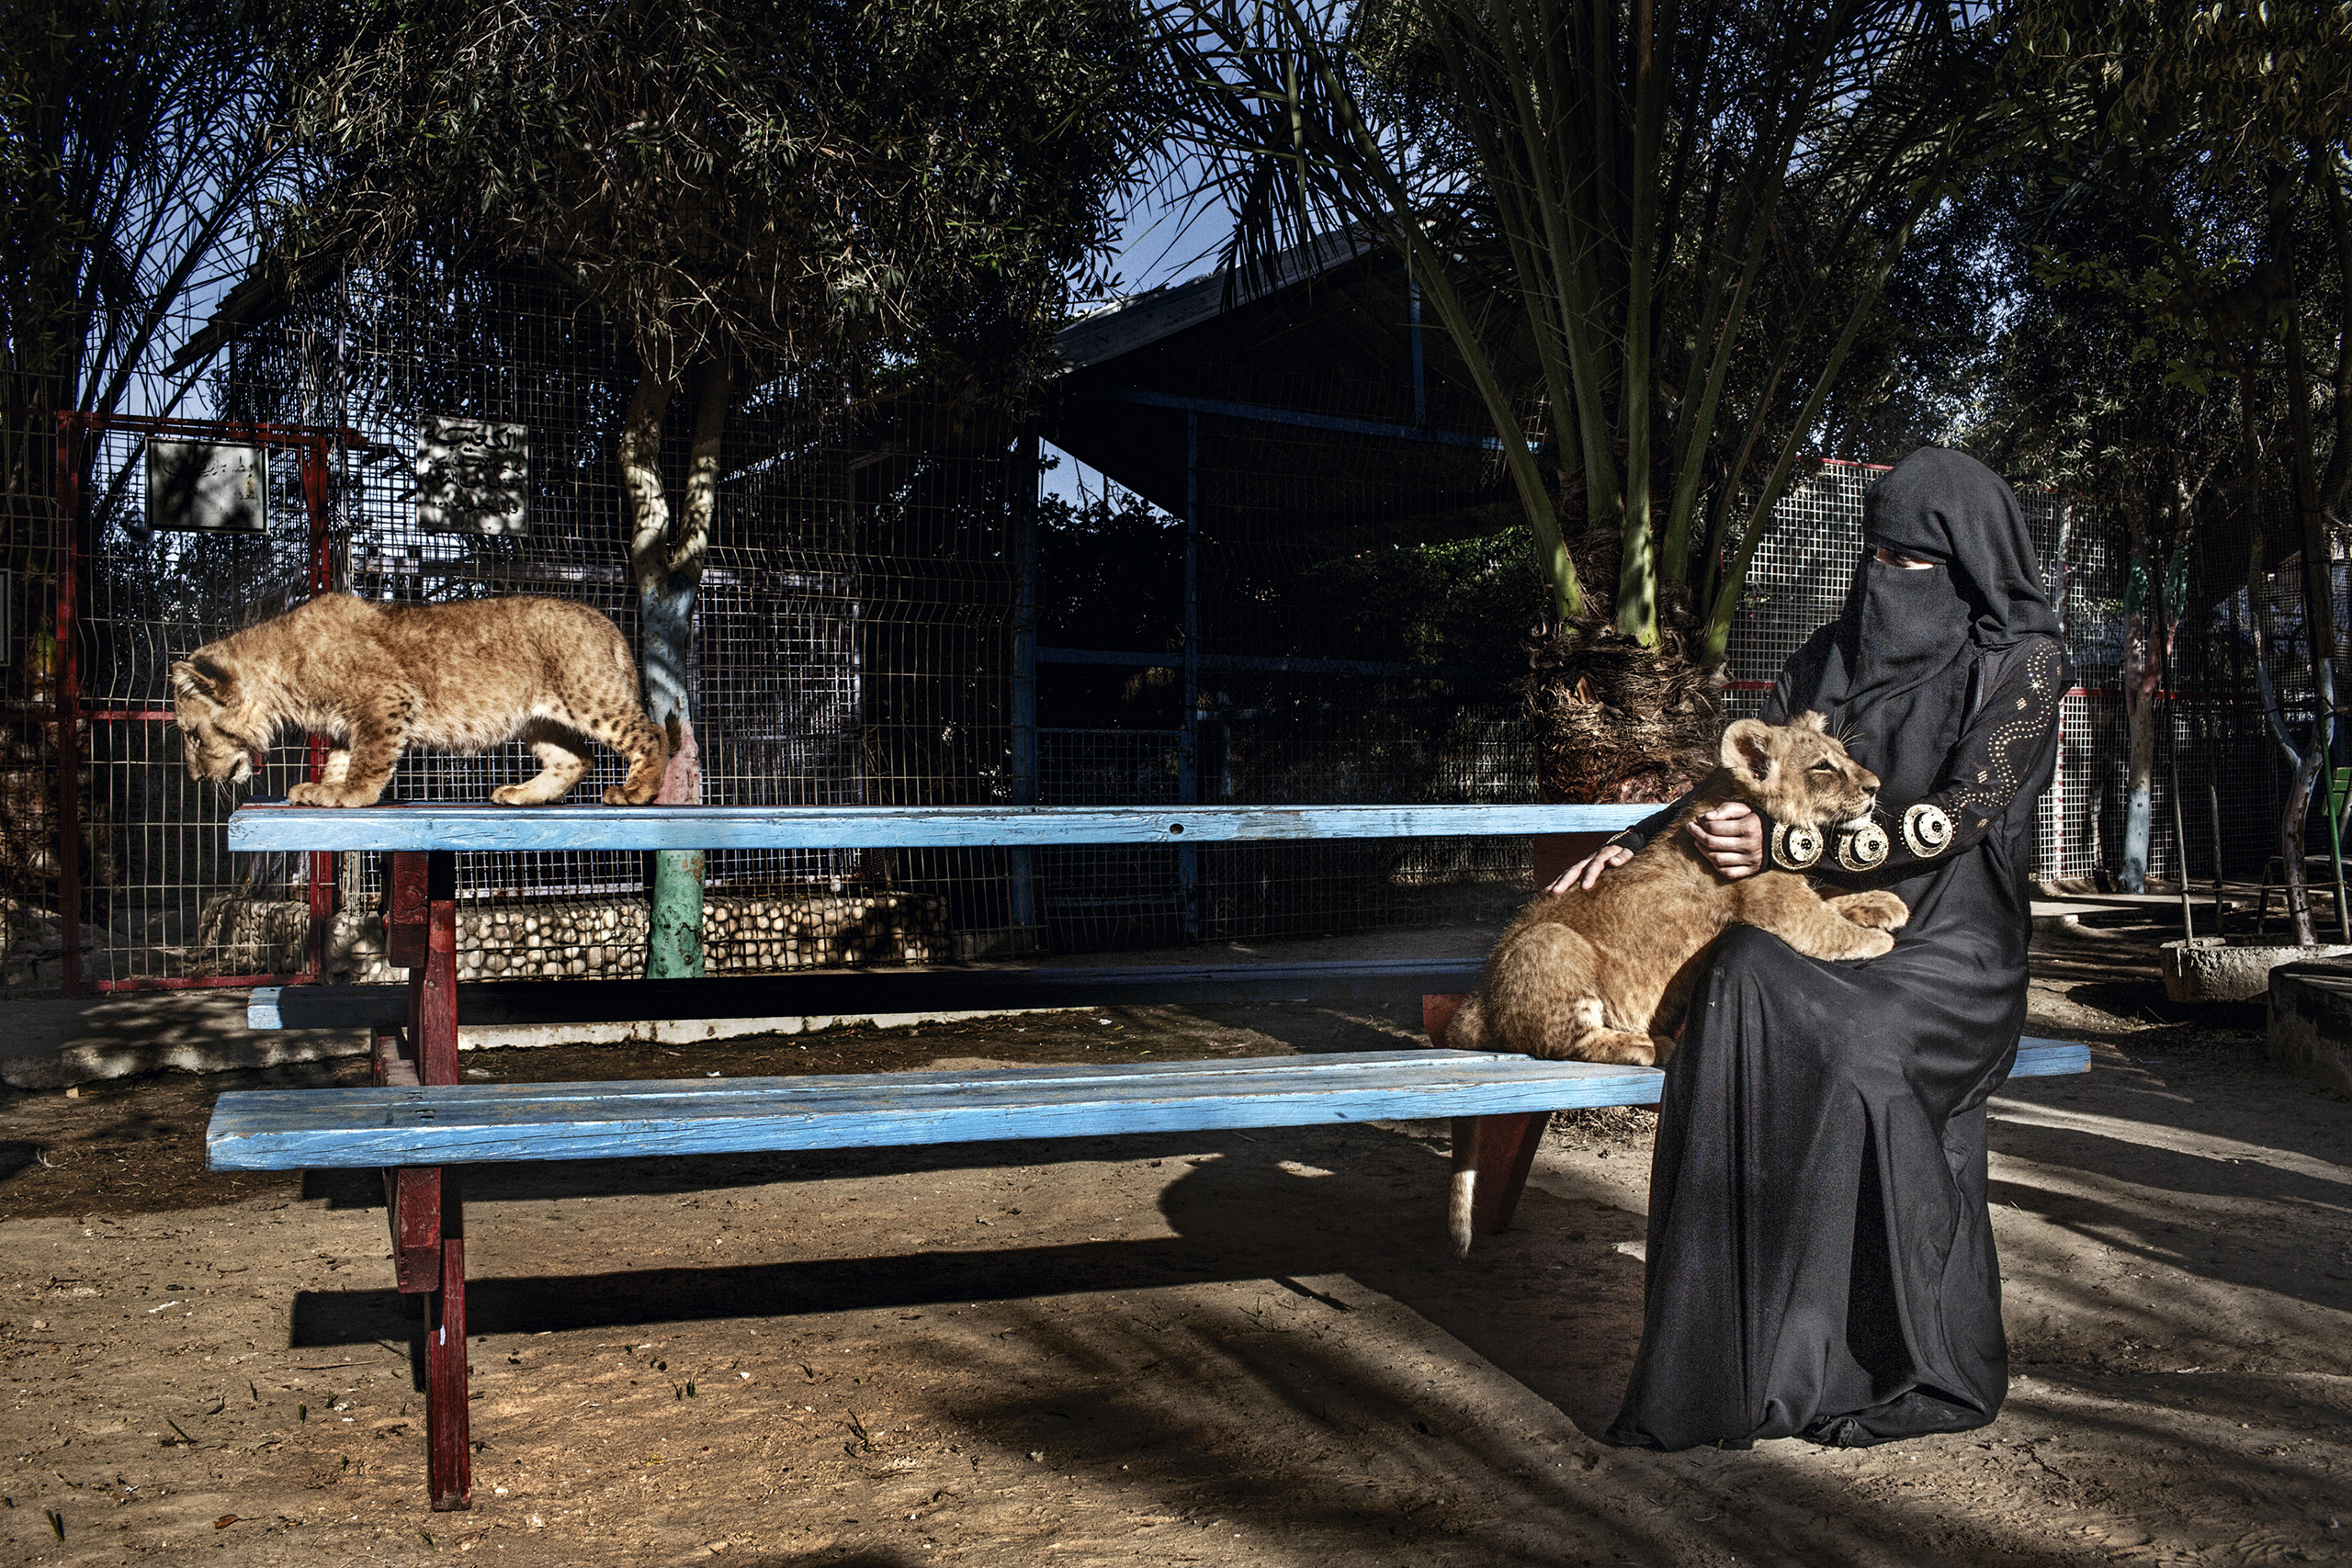 A woman plays with two baby lion cubs born in the Rafah Zoo in Gaza.  Gazan Zoo keepers are renowned for creativity, faced with limited options; having famously painted a donkey as a zebra, smuggling in animals through the tunnels, and stuffing them once they are dead, as animals are difficult to replace.